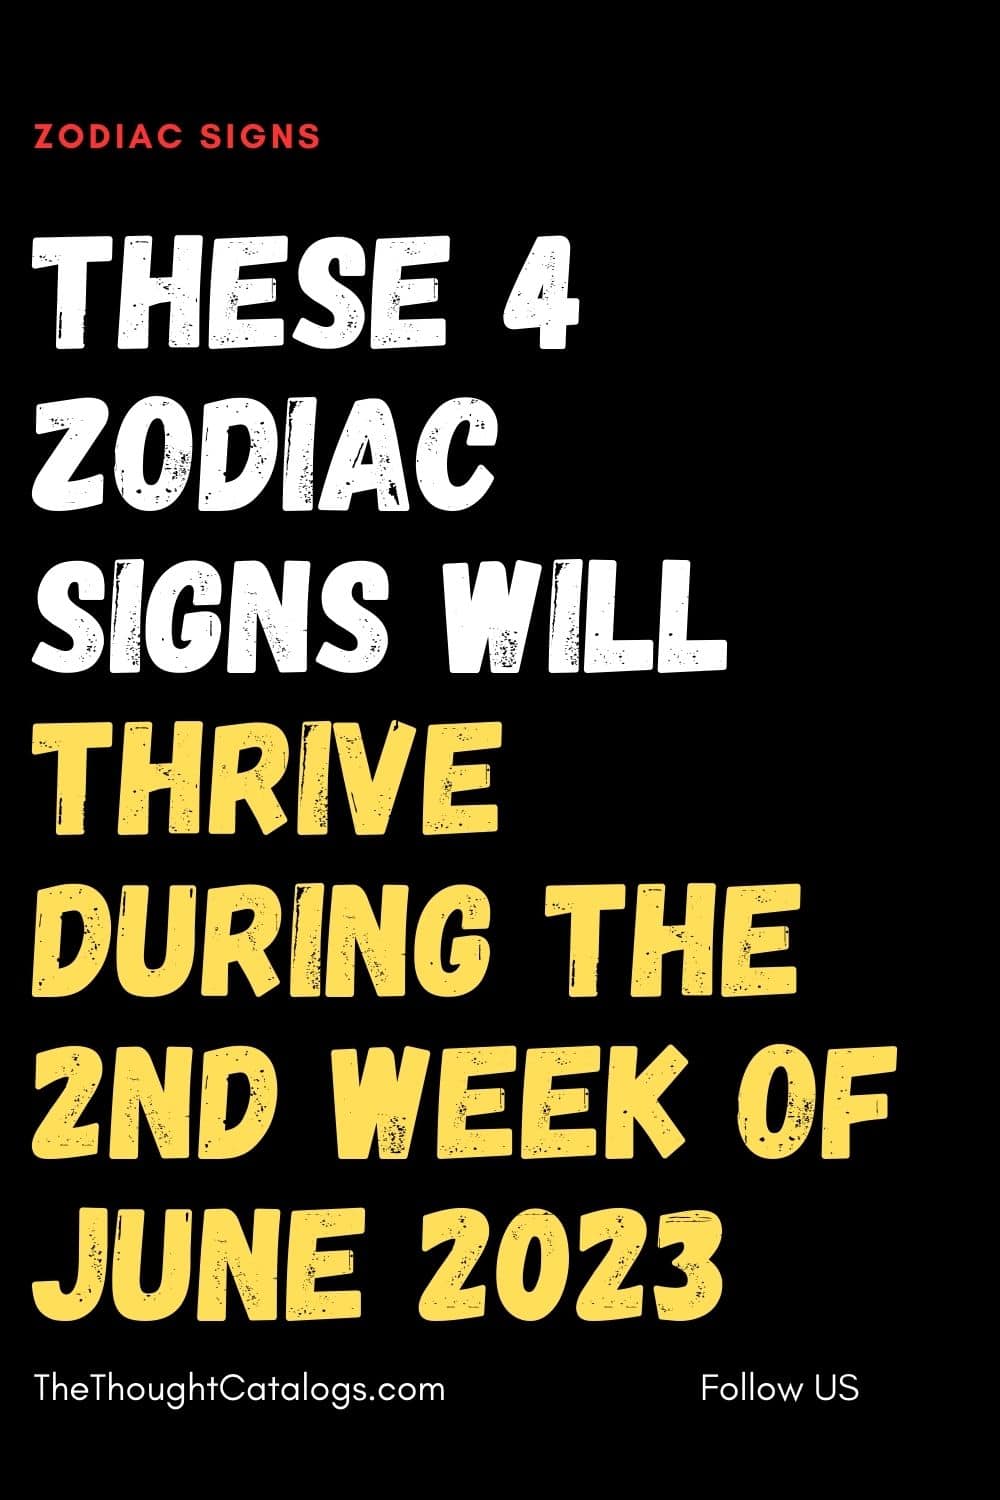 Zodiac Signs Will Thrive During The 2nd Week Of June 2023